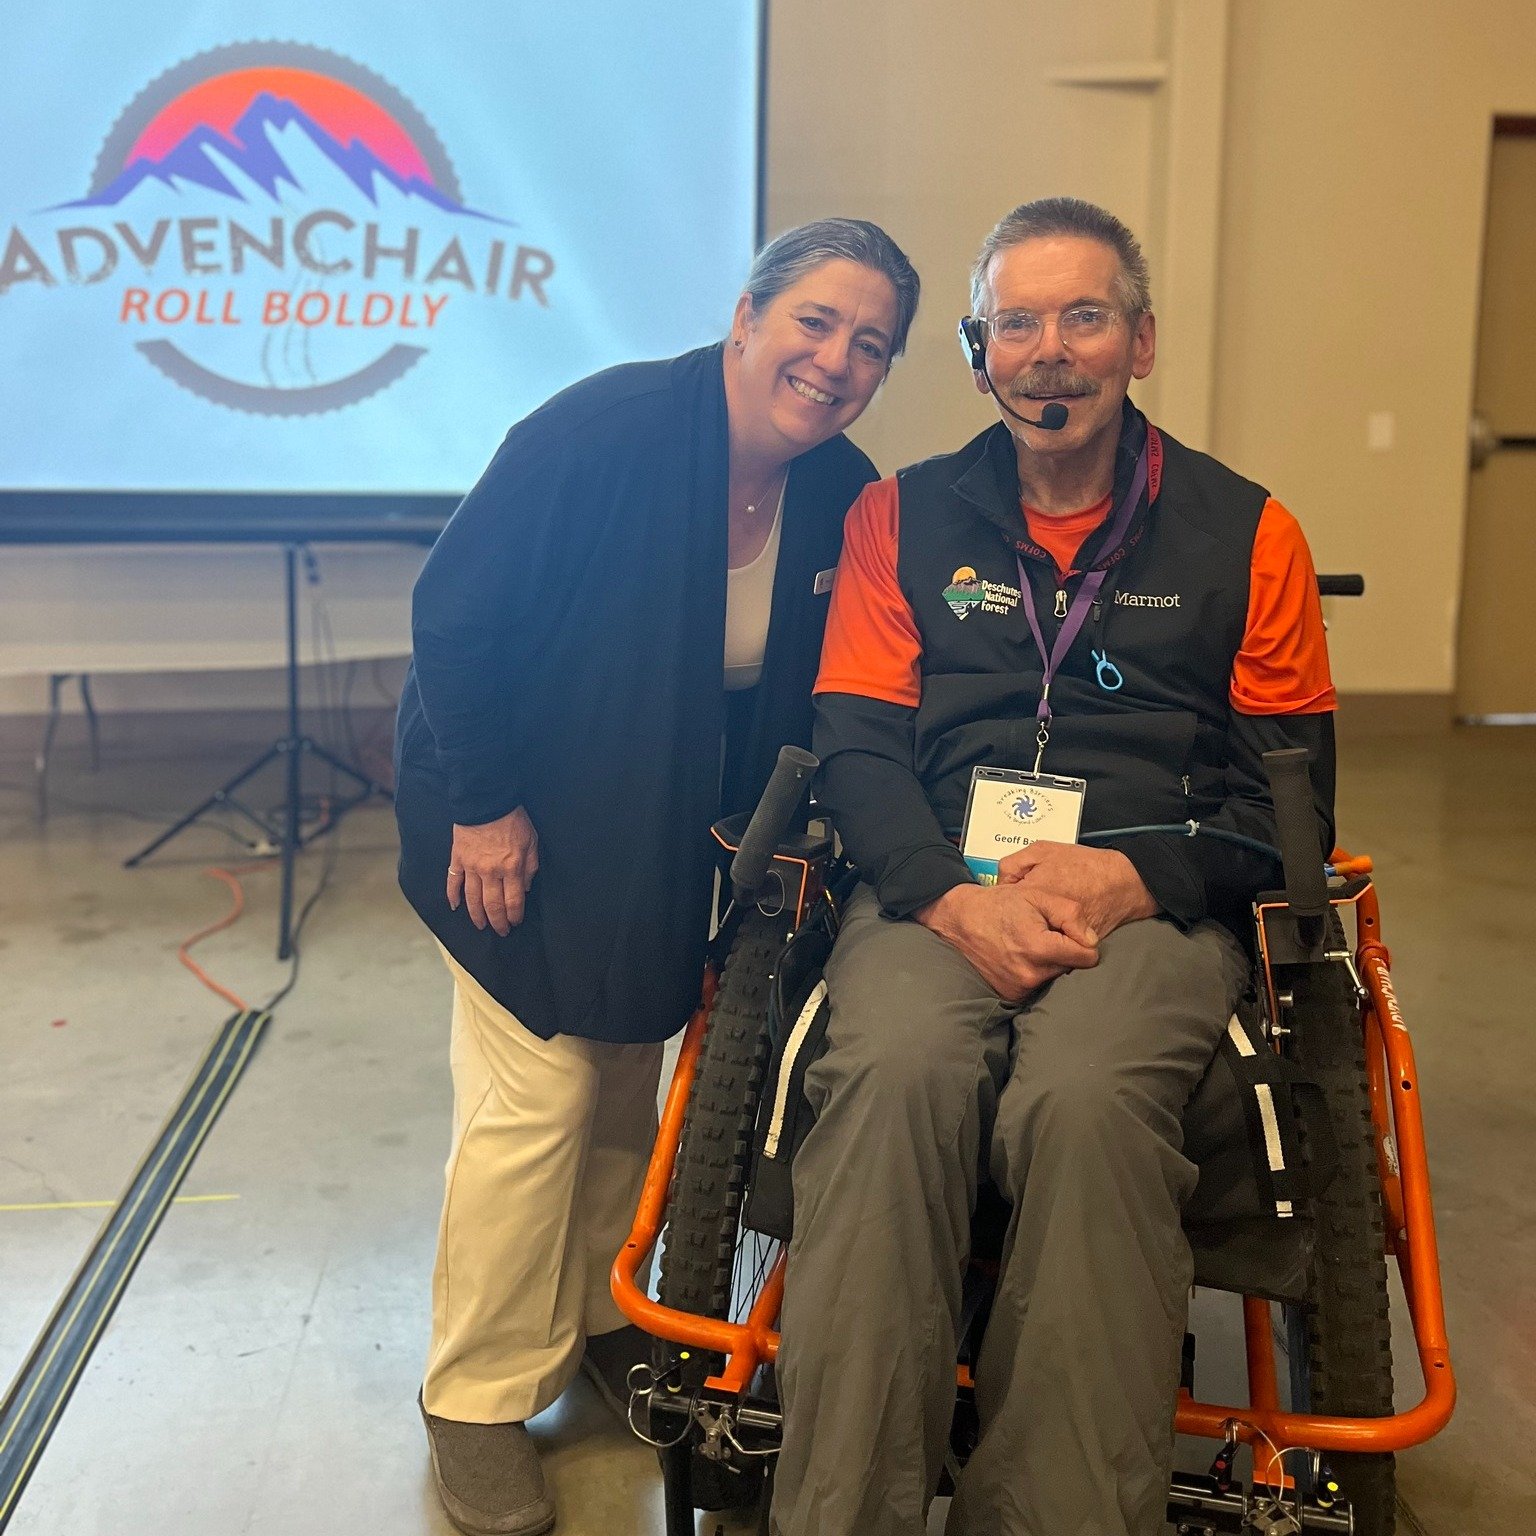 On April 25, we had a wonderful time attending the Breaking Barriers Conference in Redmond hosted by @codsn - Central Oregon Disability Support Network. With over 500 attendees, we spoke with several AdvenChair fans and showed DREAM BOLDLY: The Grand